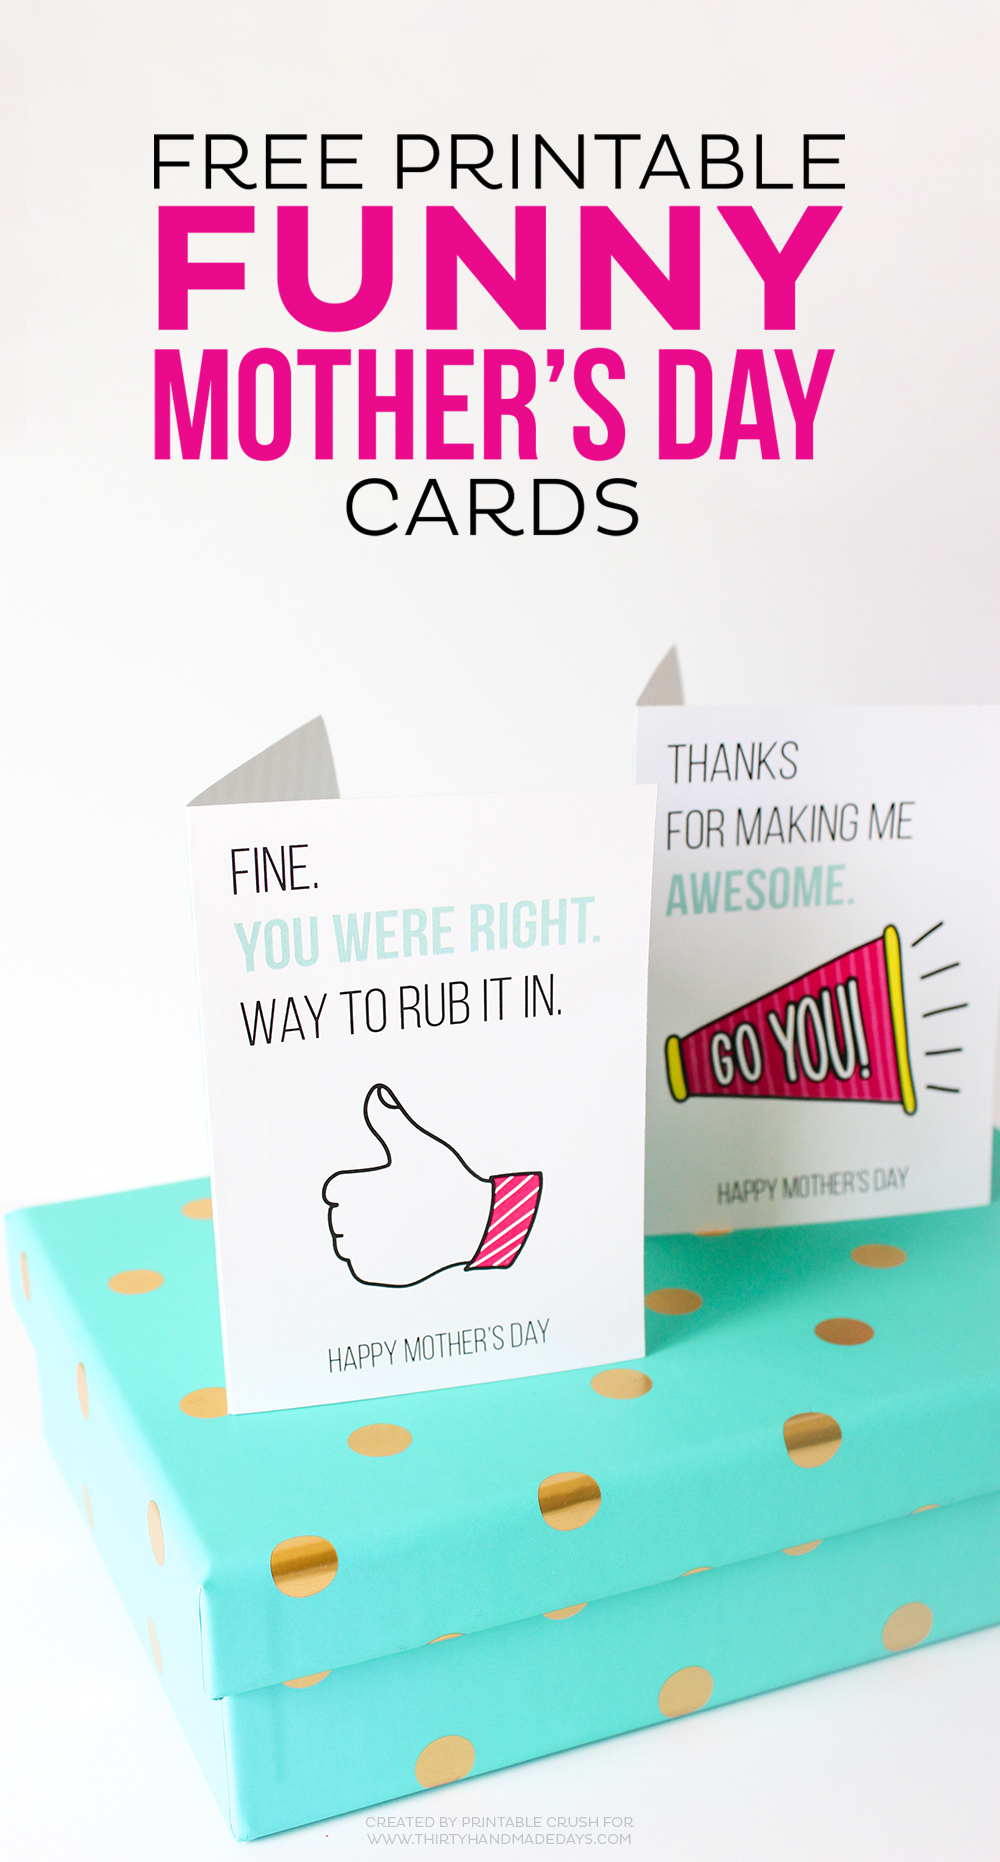 Printable Mother&amp;#039;S Day Cards throughout Free Printable Funny Mother&amp;amp;#039;s Day Cards